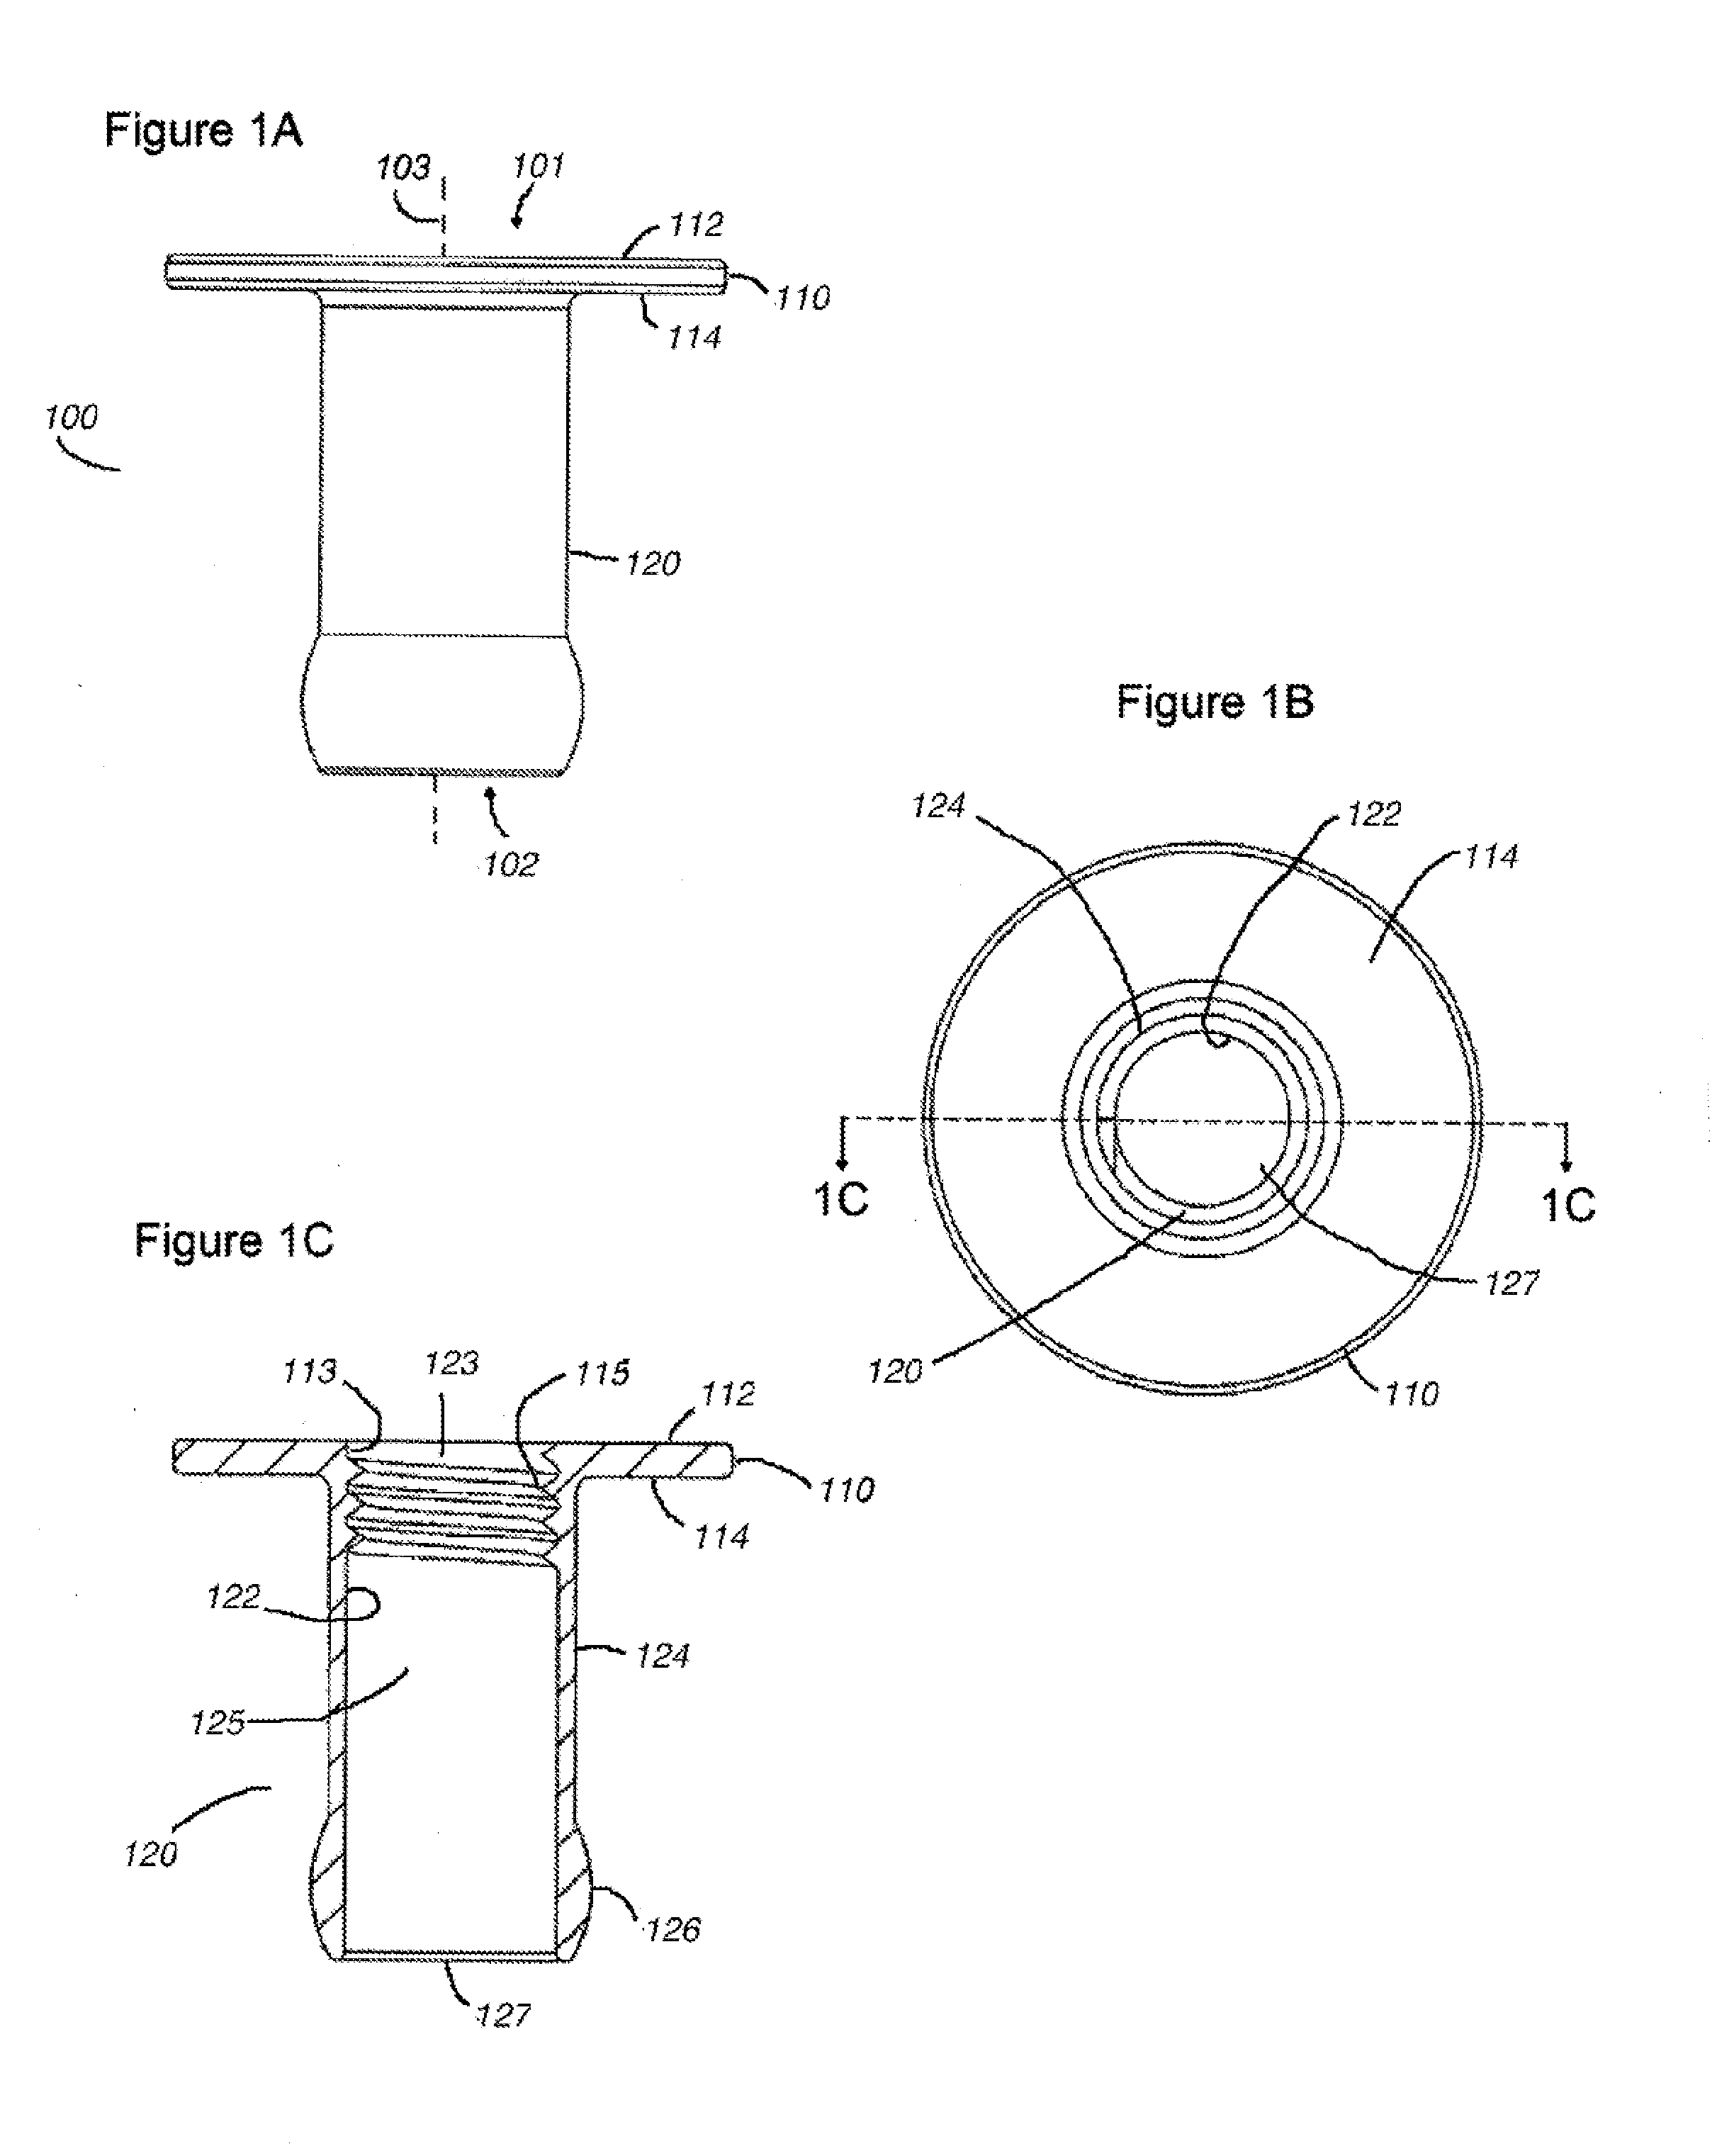 Apparatus for oral delivery of fluids and semi-solid foods